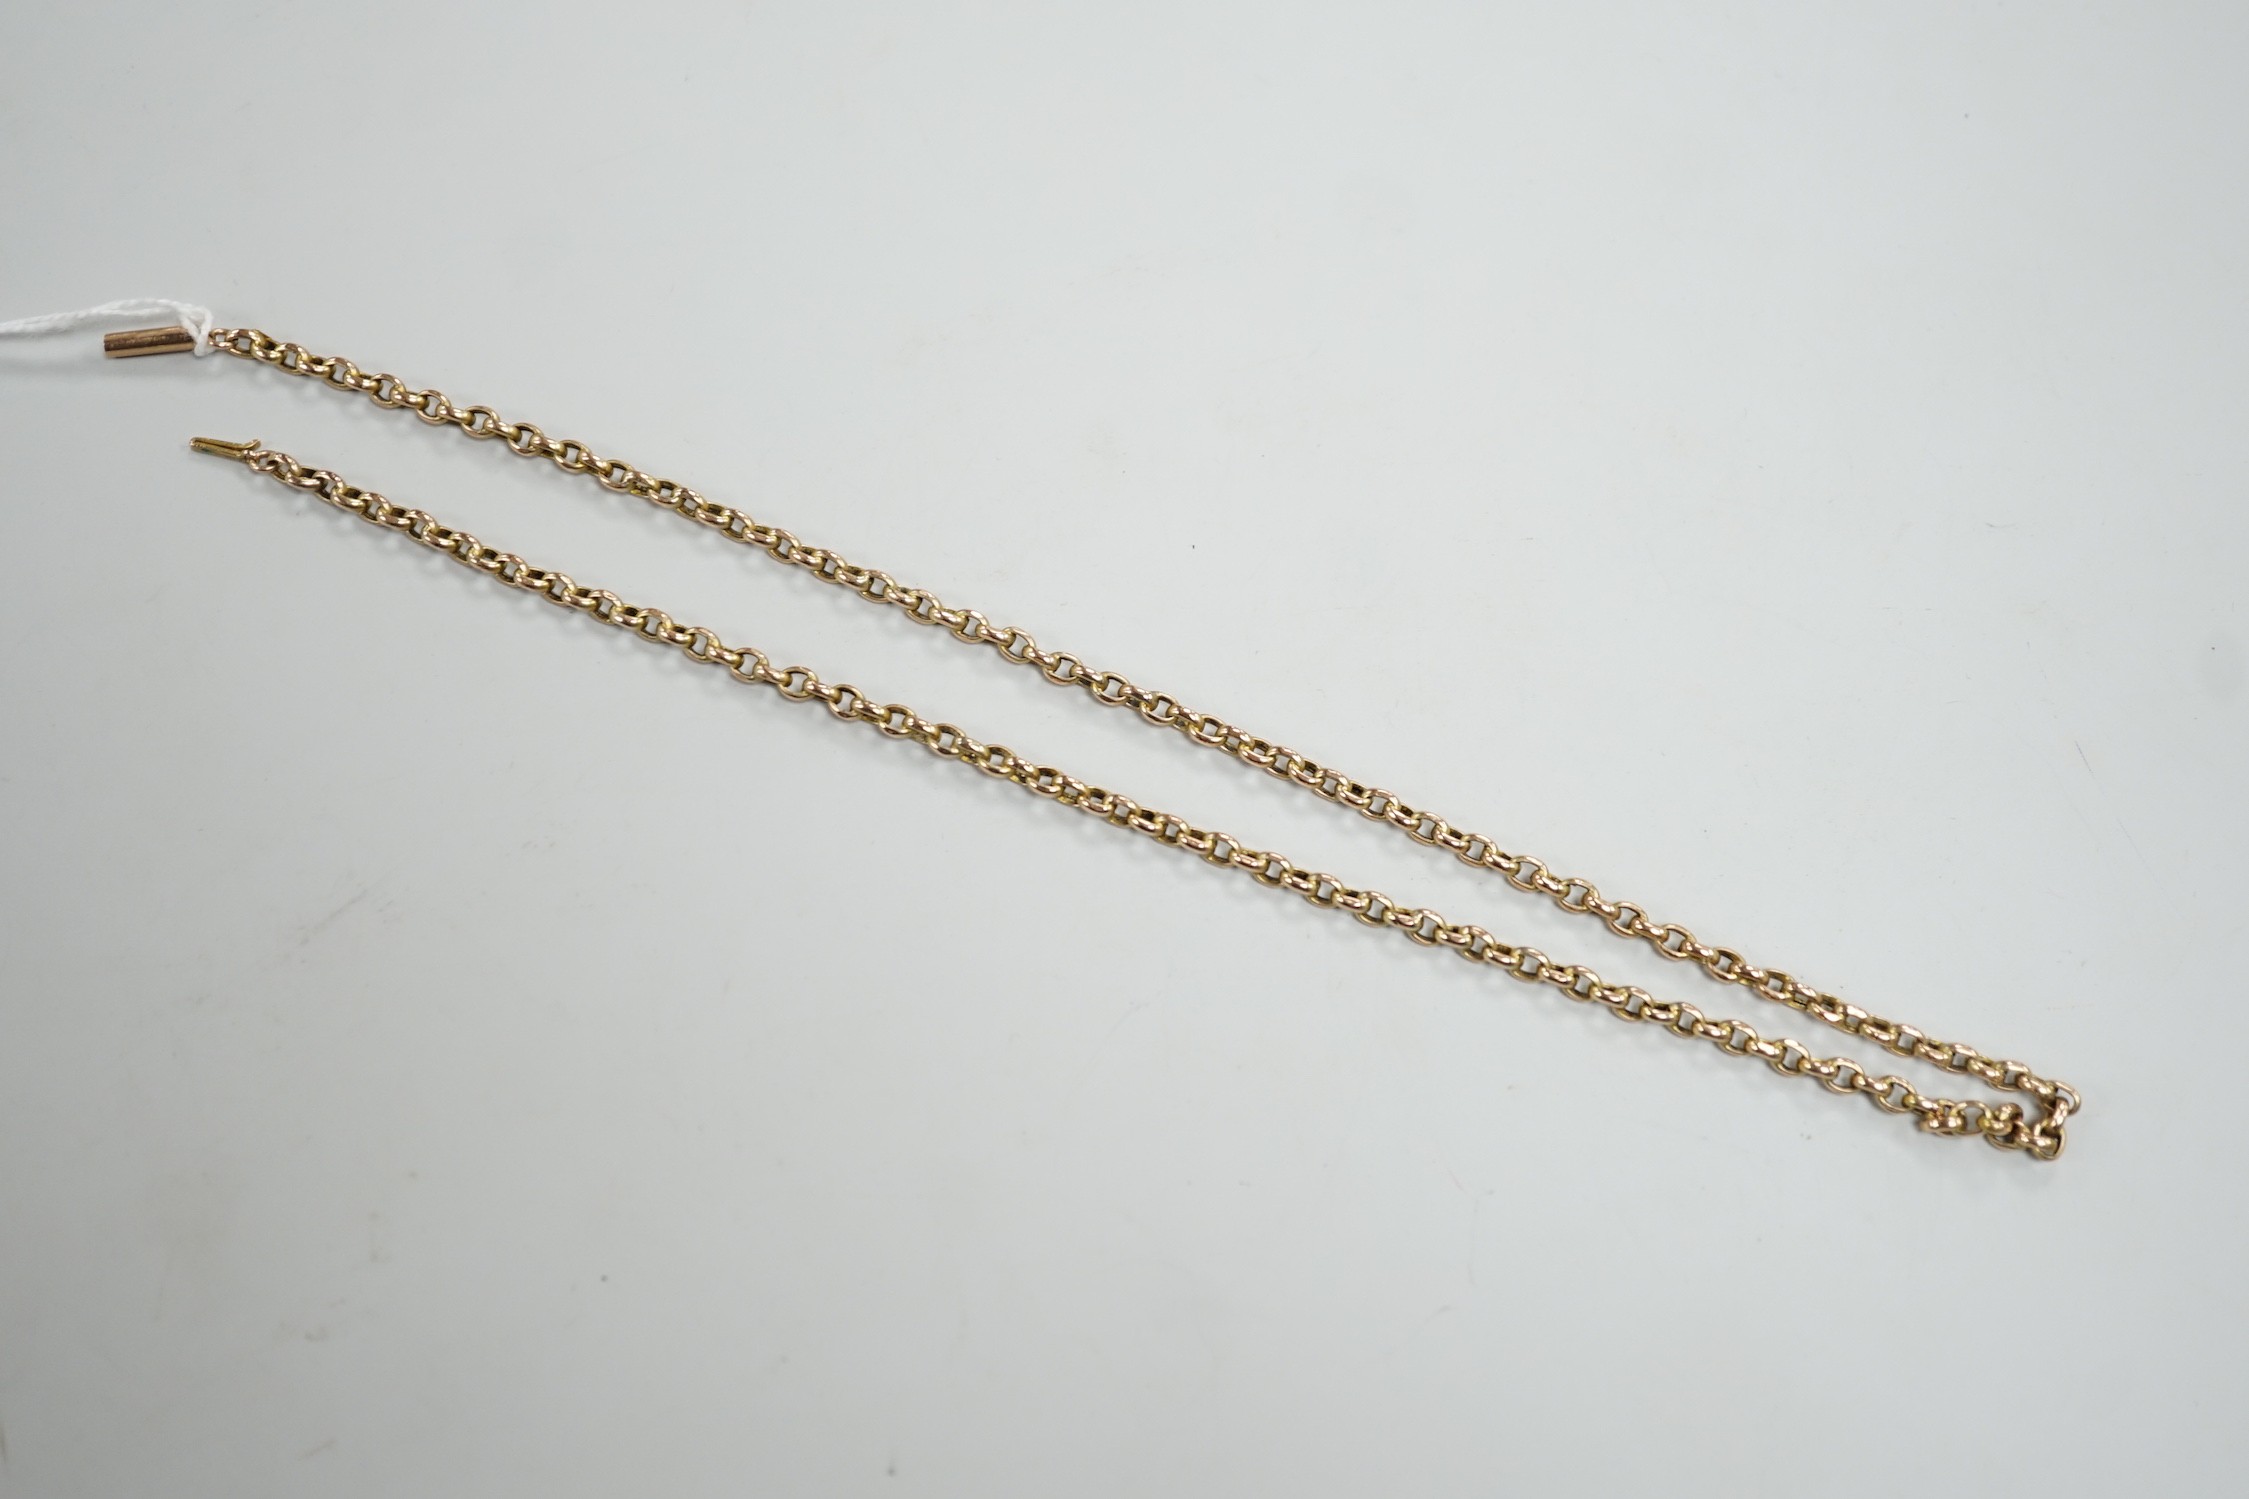 A 9ct oval link chain, 46cm, 7.4 grams.